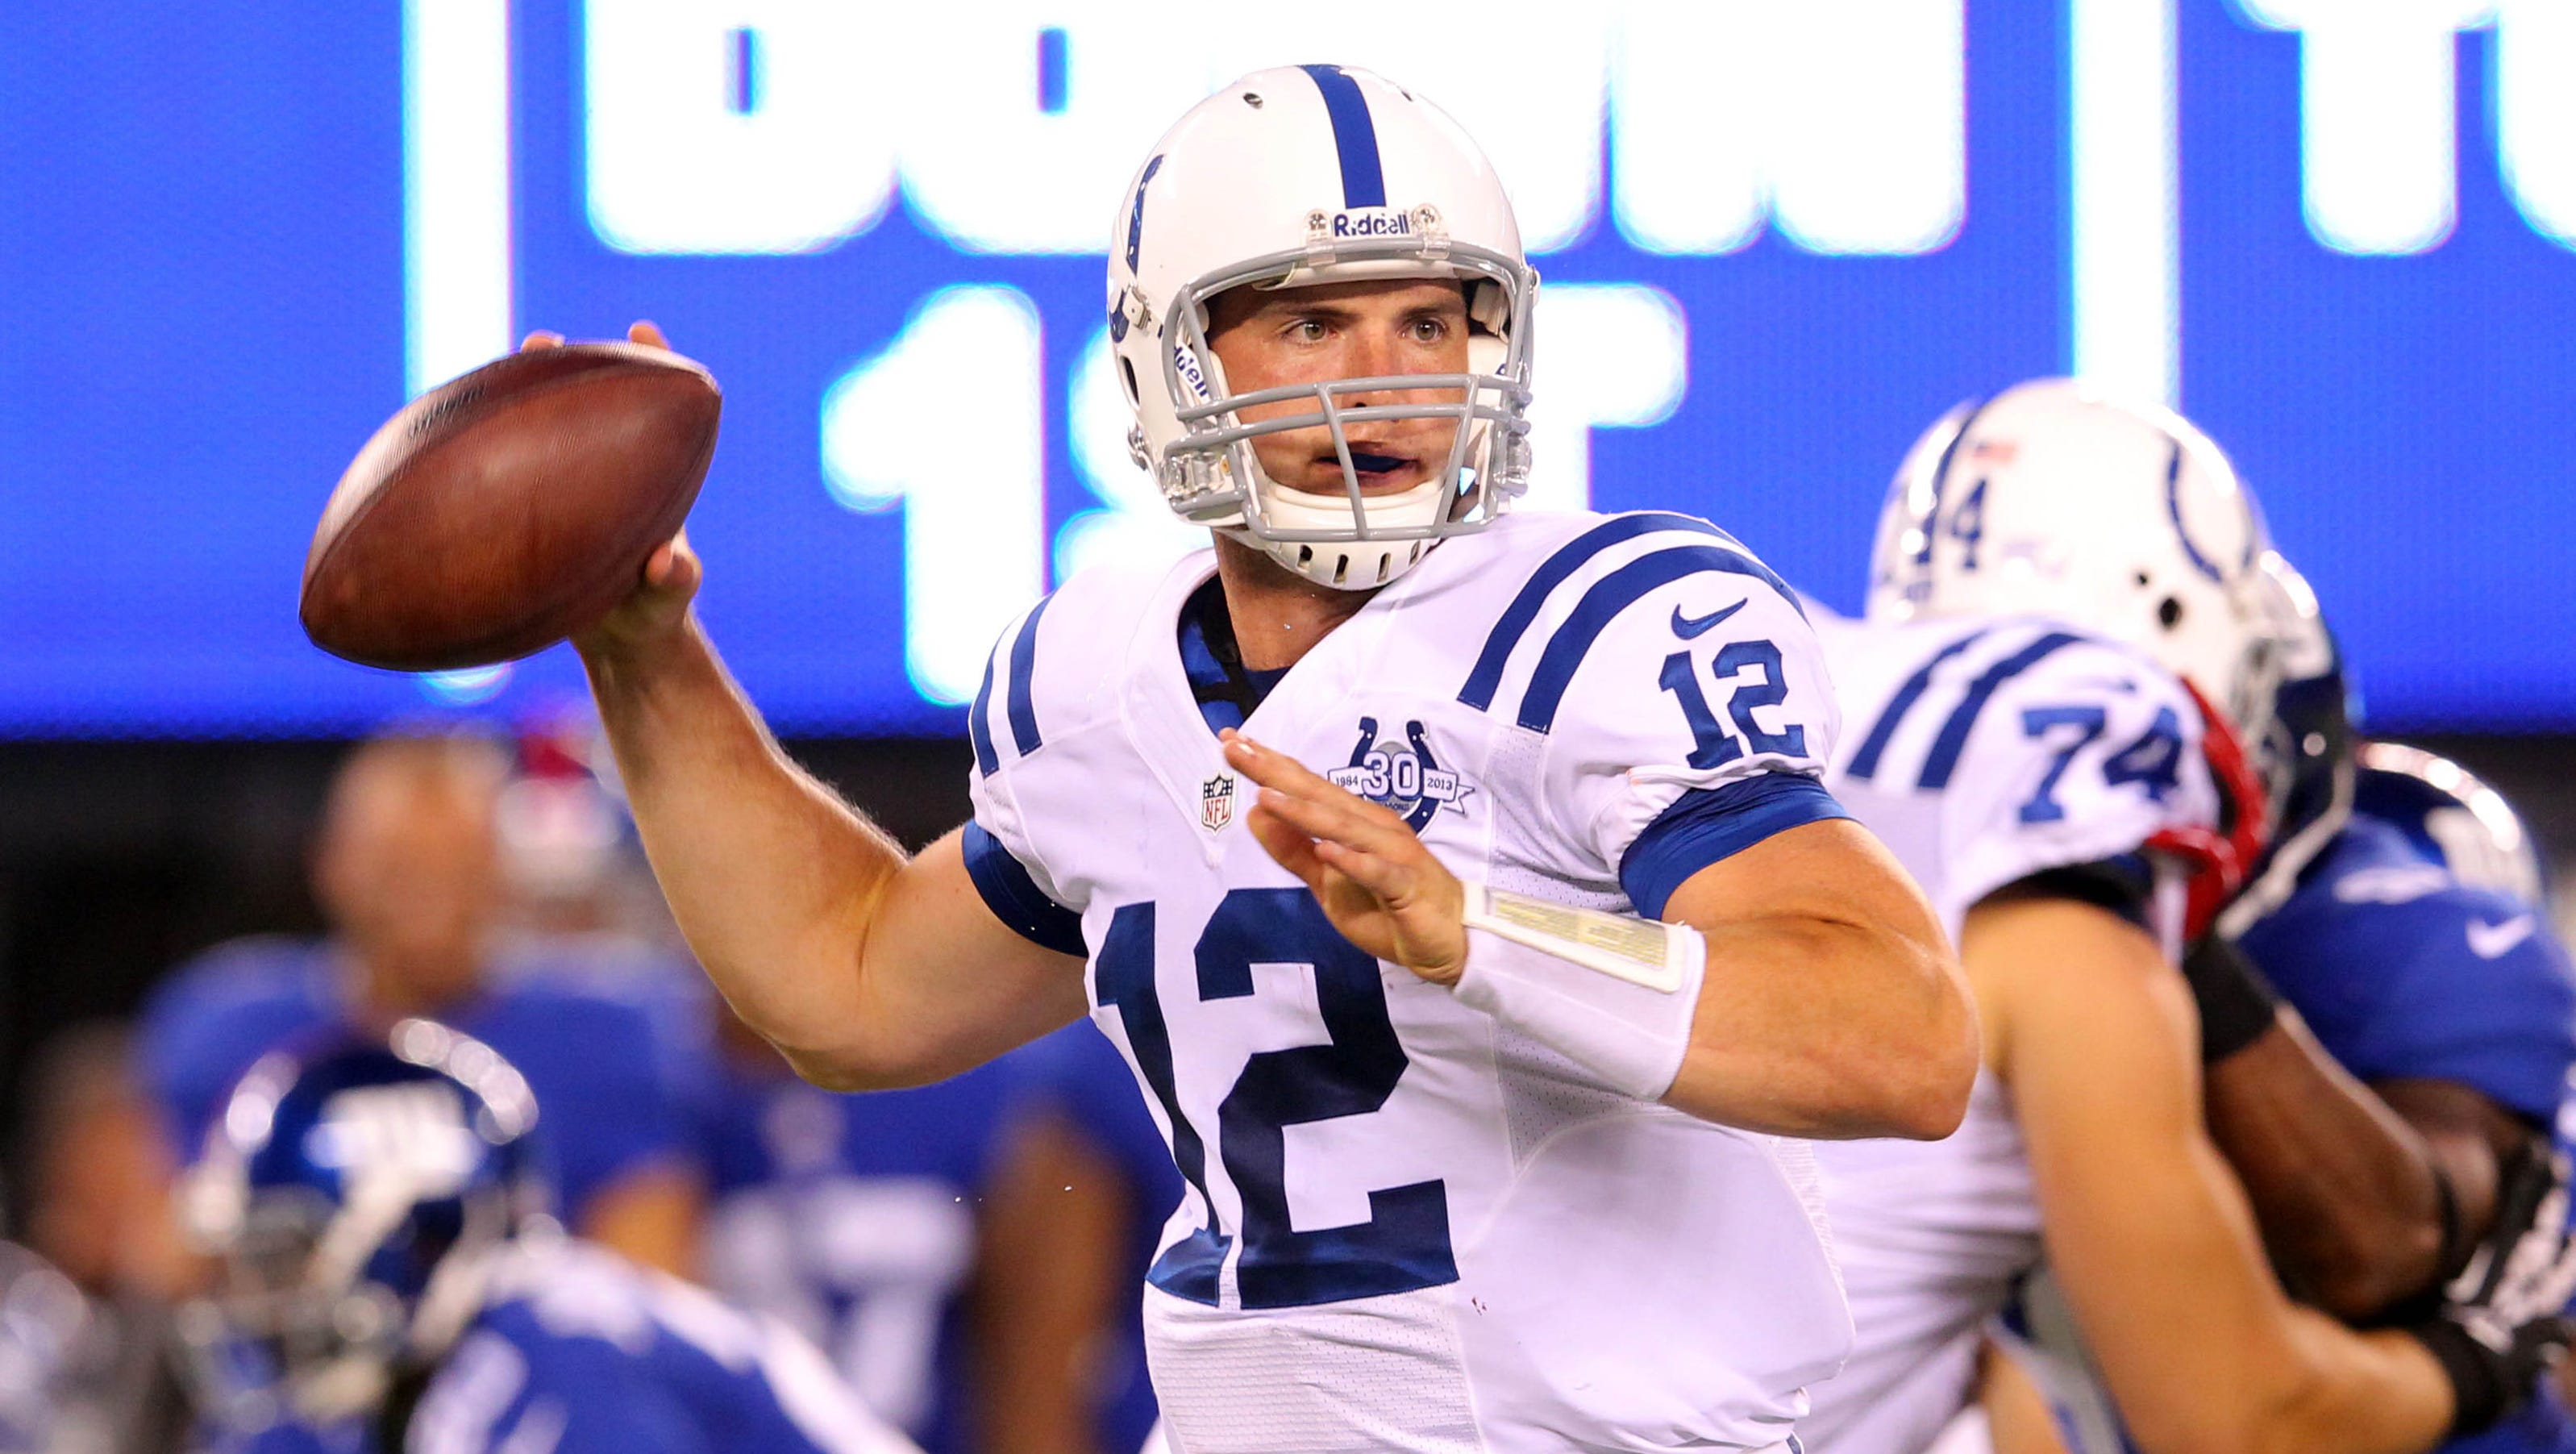 Kravitz to Colts: Ditch the running game, go with Luck